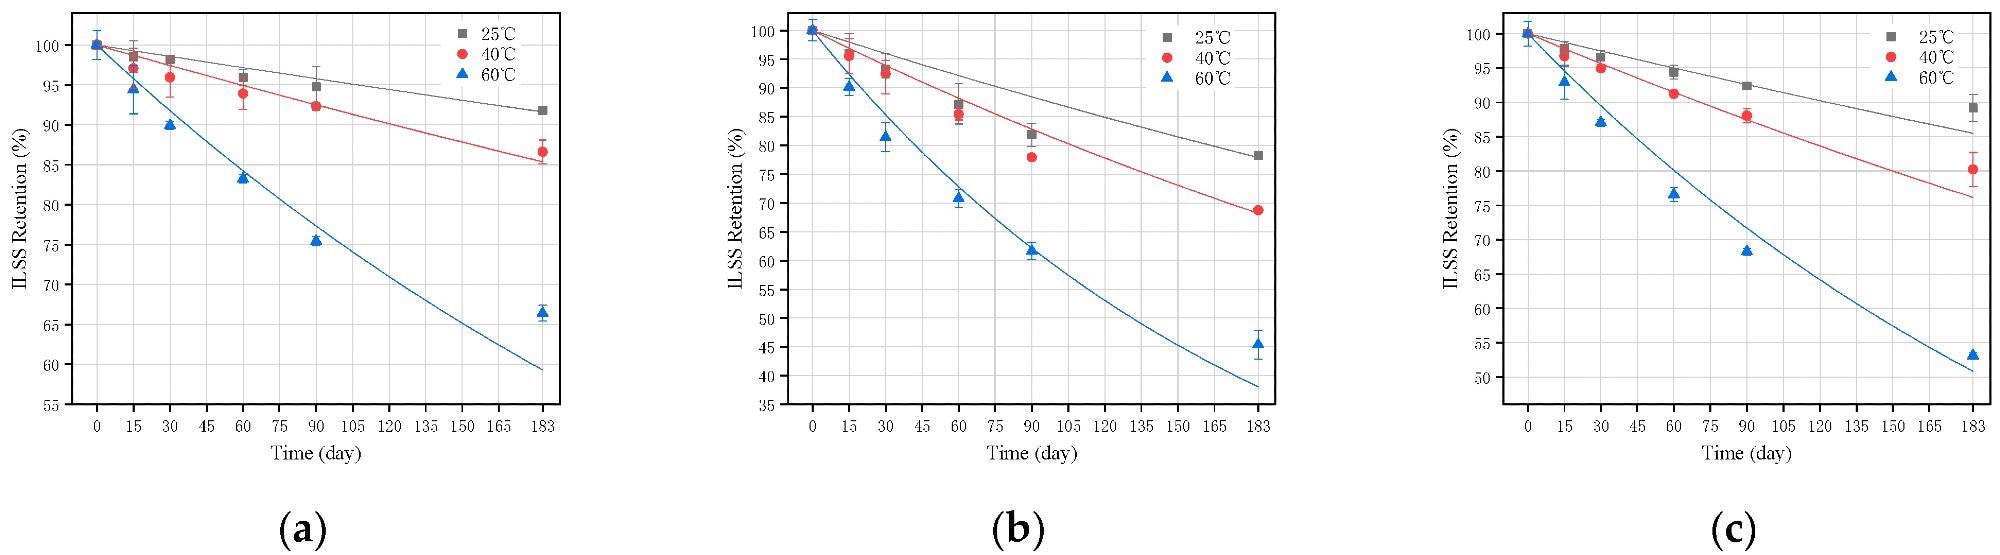 Fitting of long-term mechanical property test data for GFRP bars based on Model 2 in different environments: (a) SW; (b) SA; and (c) SWC.